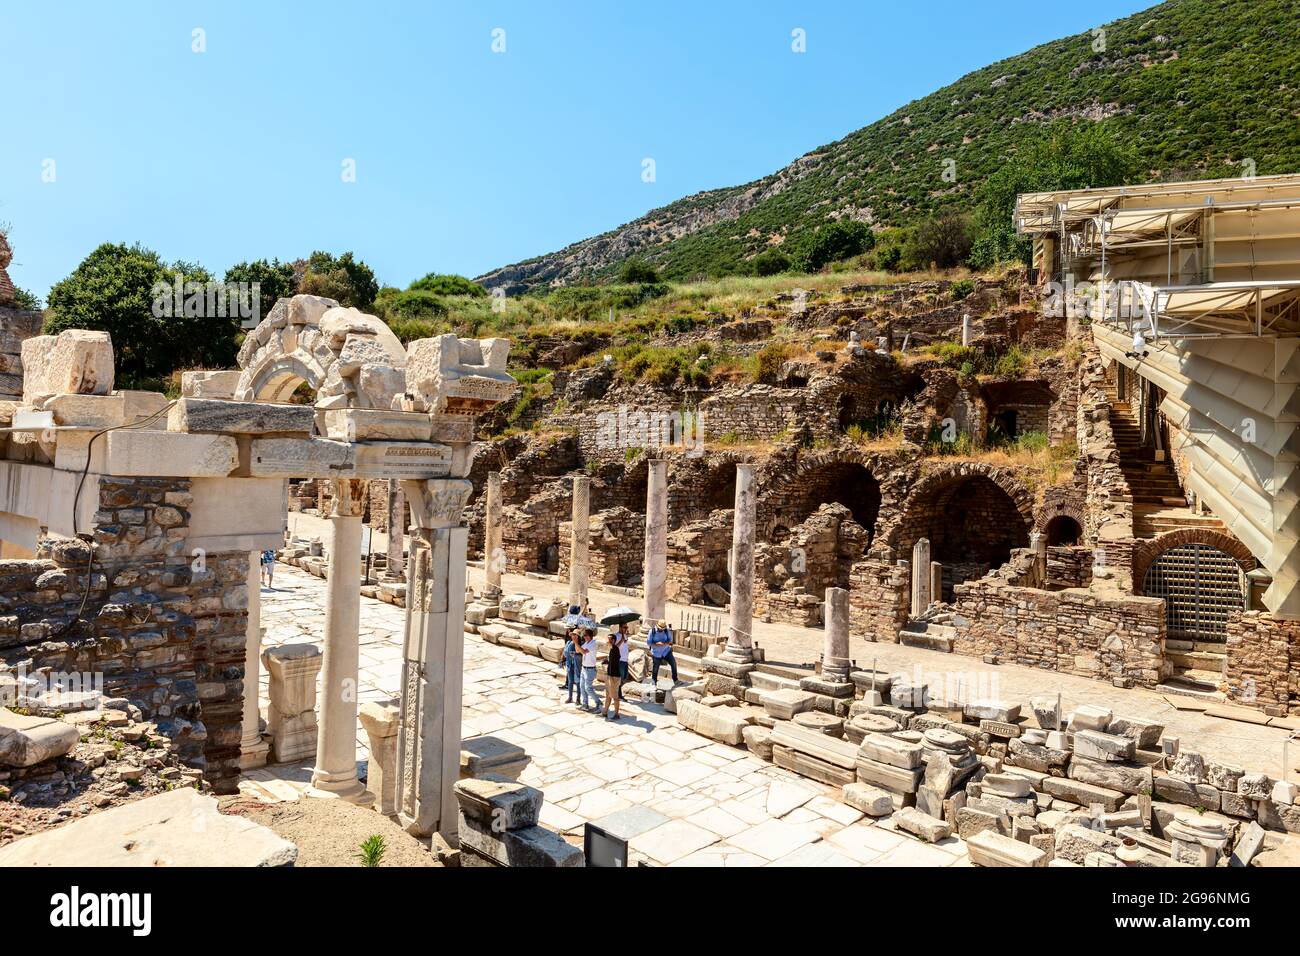 Restoration work in progress at the ancient Roman Archaeological site of Ephesus with mosaics and temple of Hadrian in Anatolia, Turkey. Stock Photo